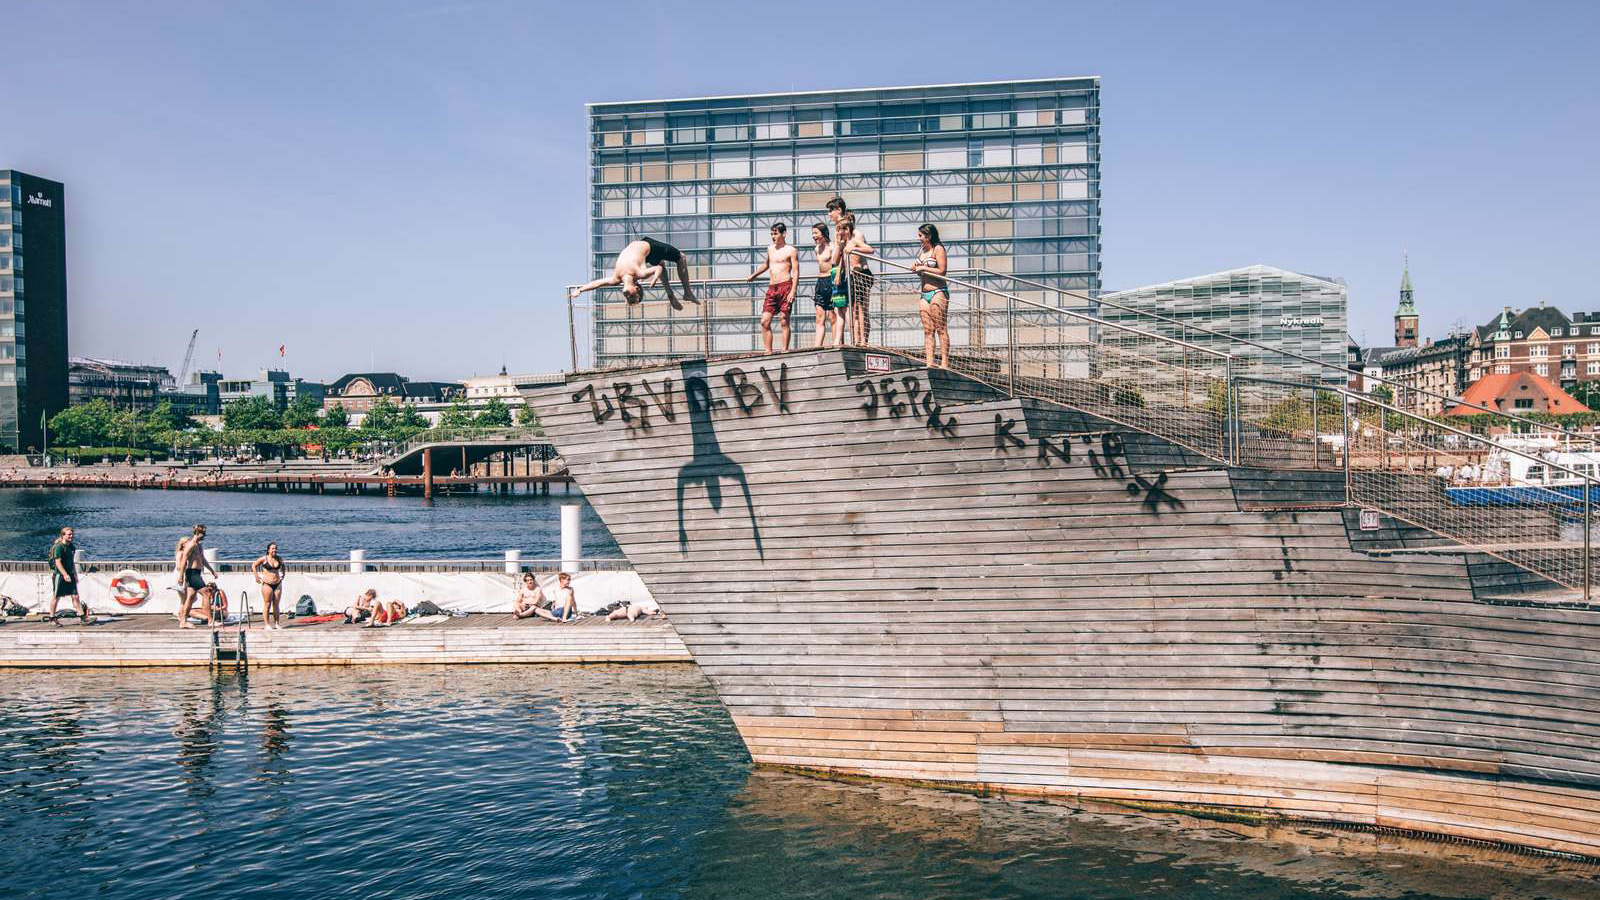 solidaritet forholdet ristet brød Things to do in Copenhagen | See all the beautiful places